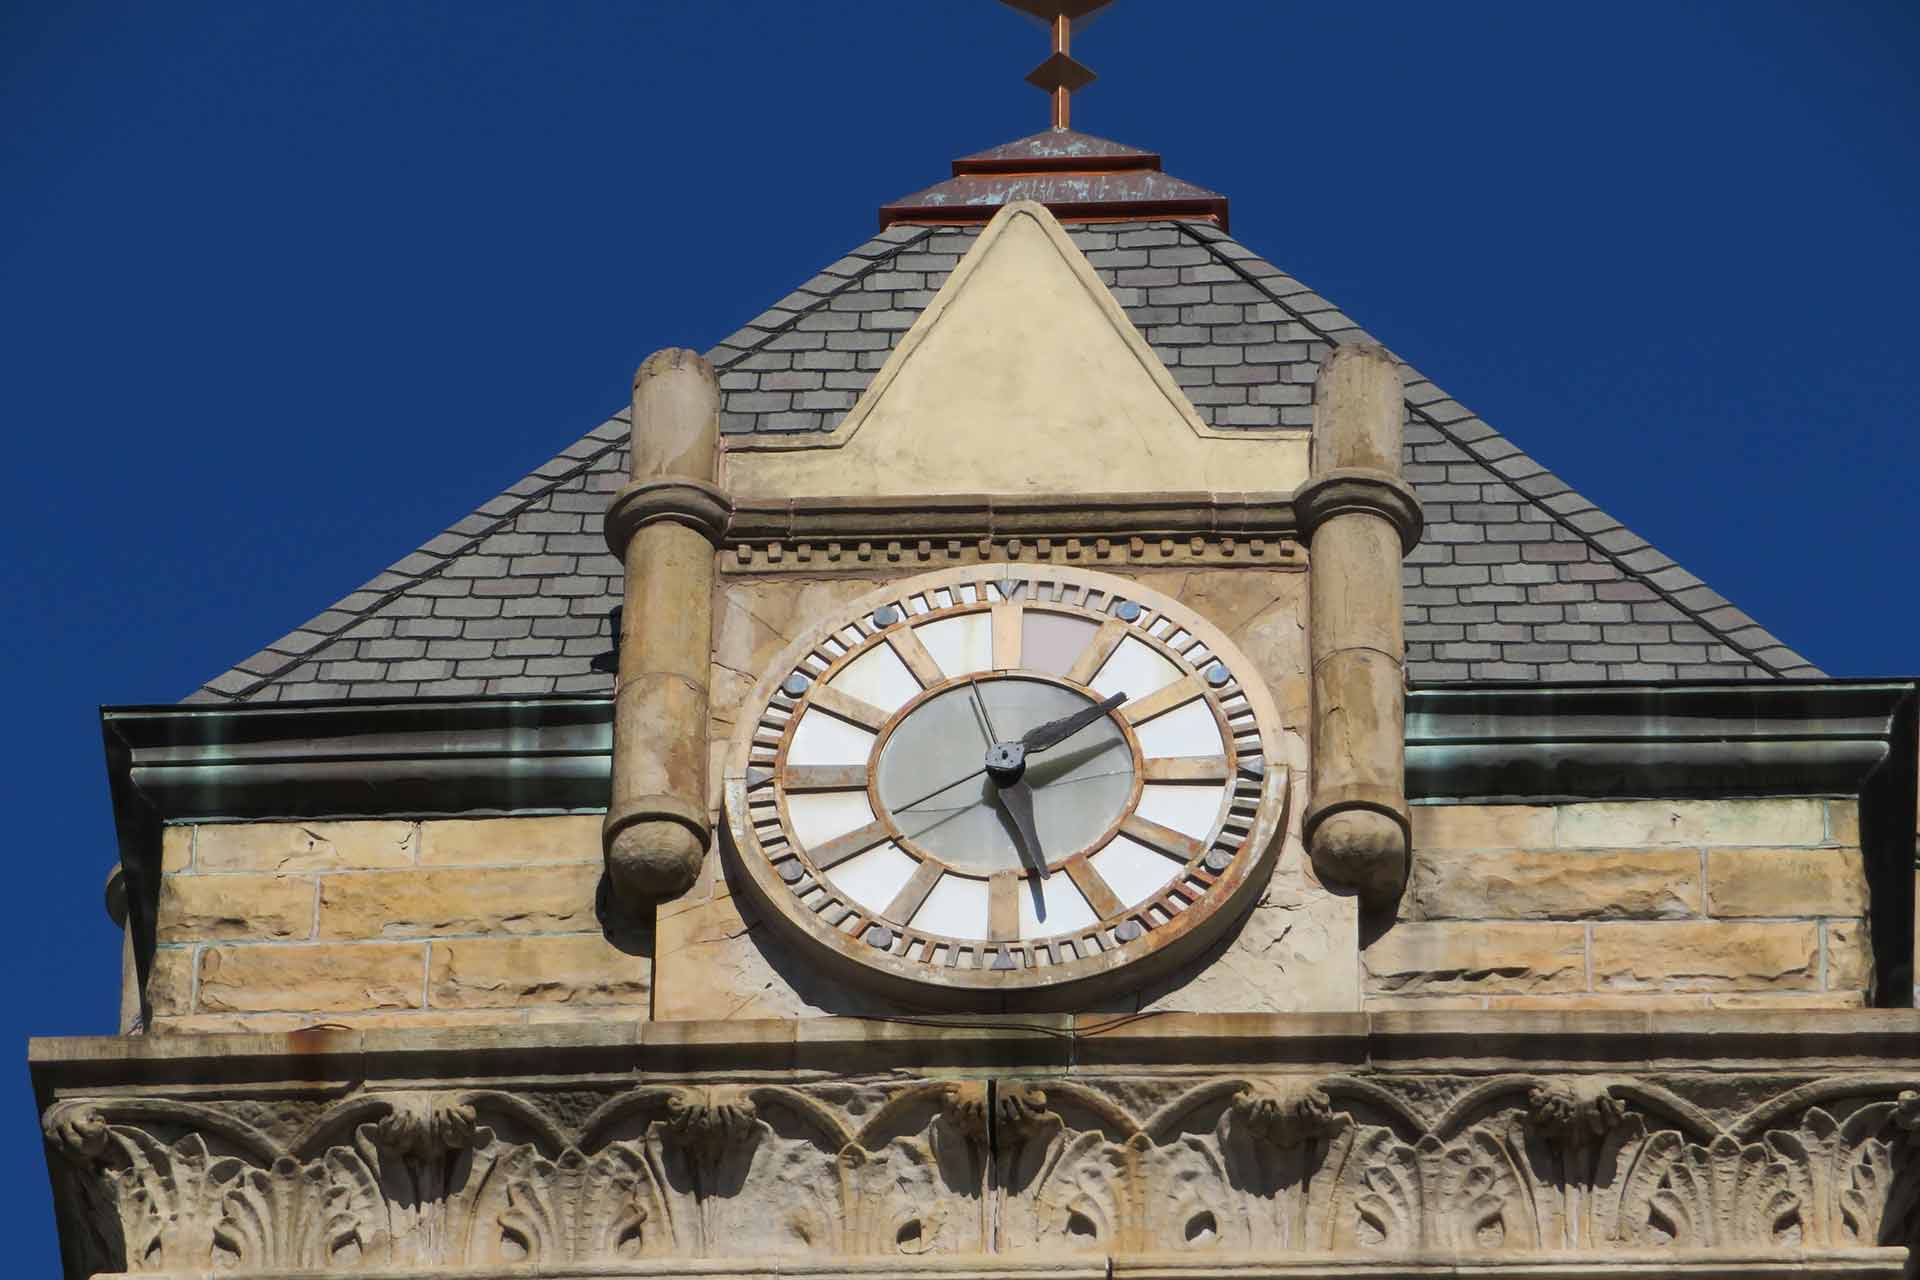 Exposure to the elements had faded the city hall clock and worn the masonry around it